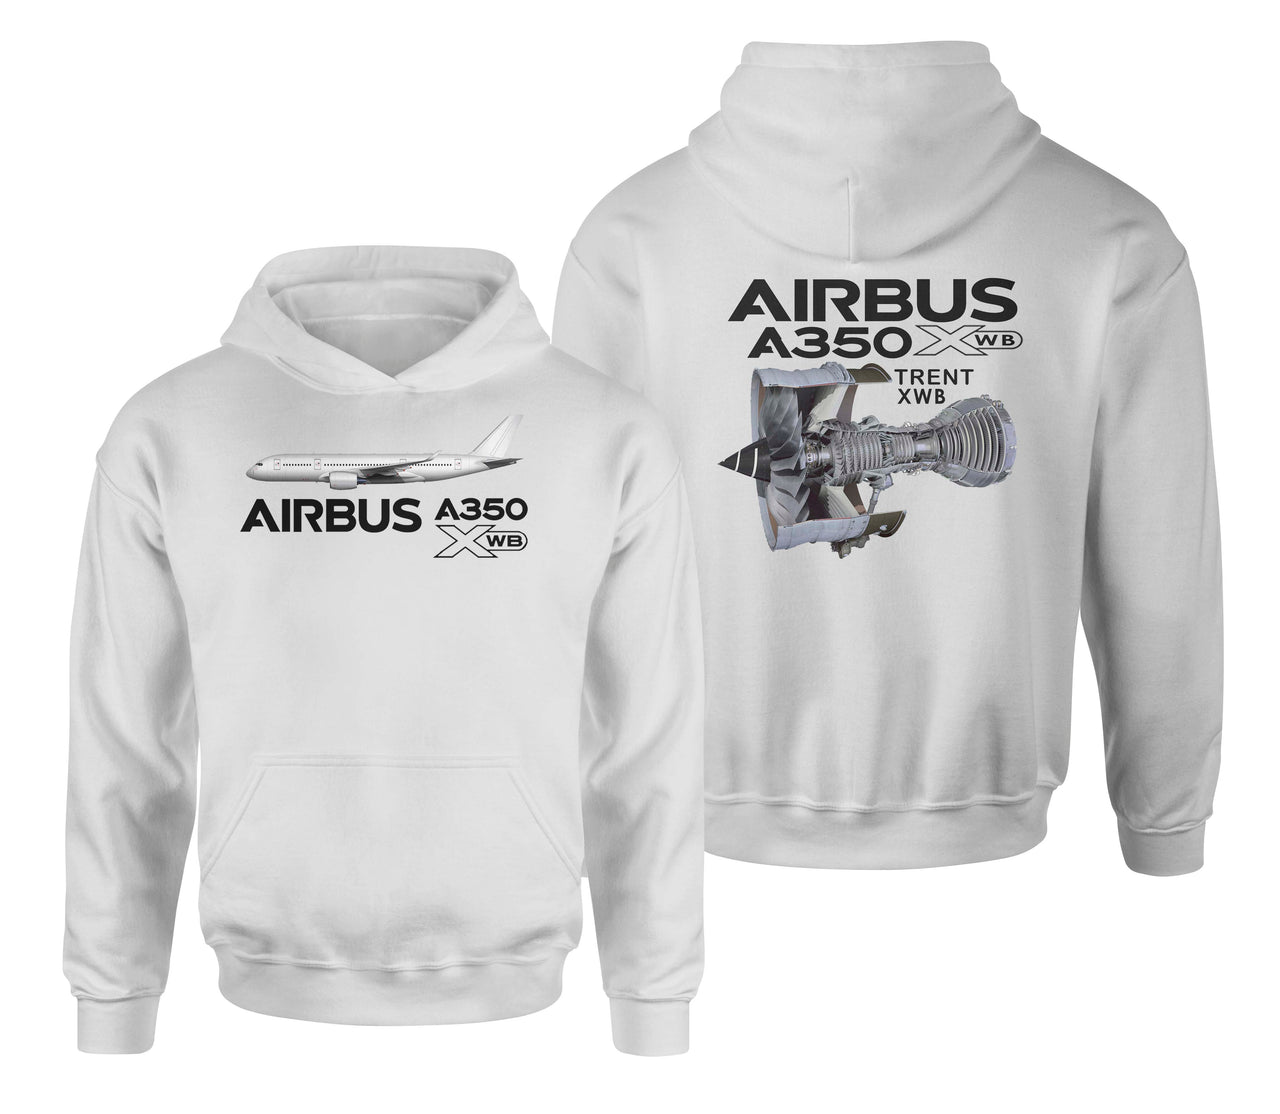 Airbus A350 & Trent XWB Engine Designed Double Side Hoodies